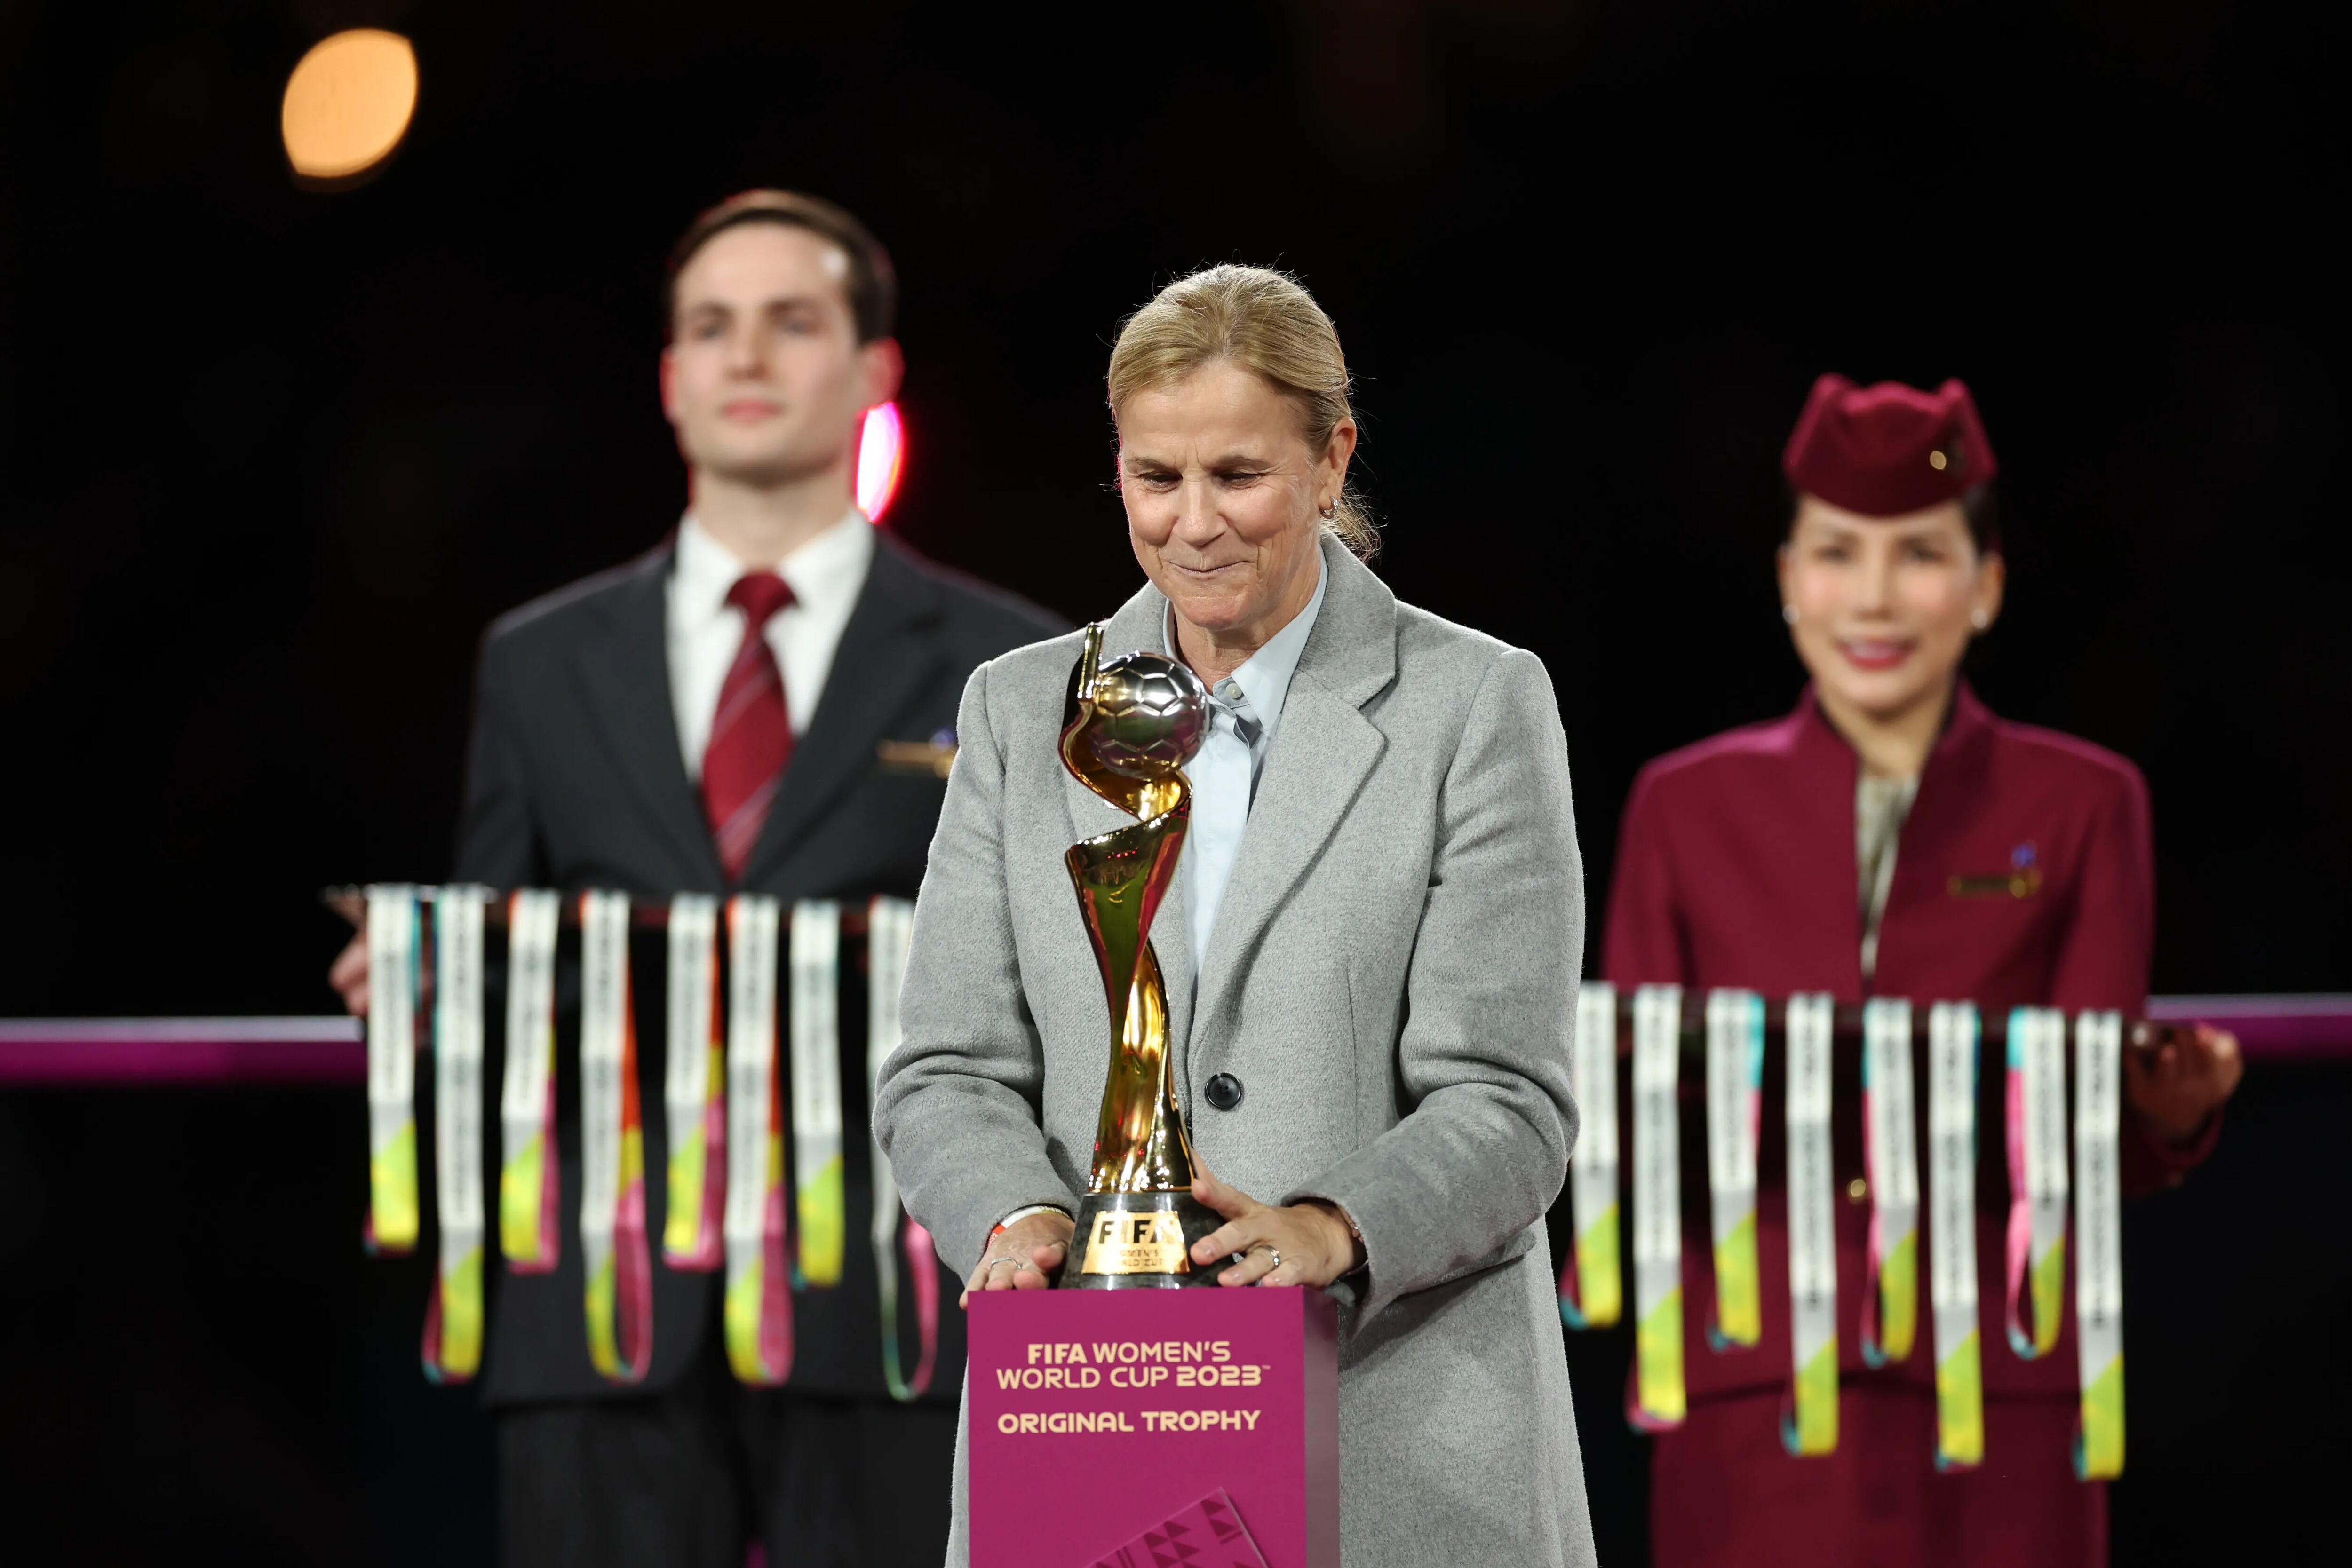 Jill Ellis presented the women's World Cup trophy on stage after the final.